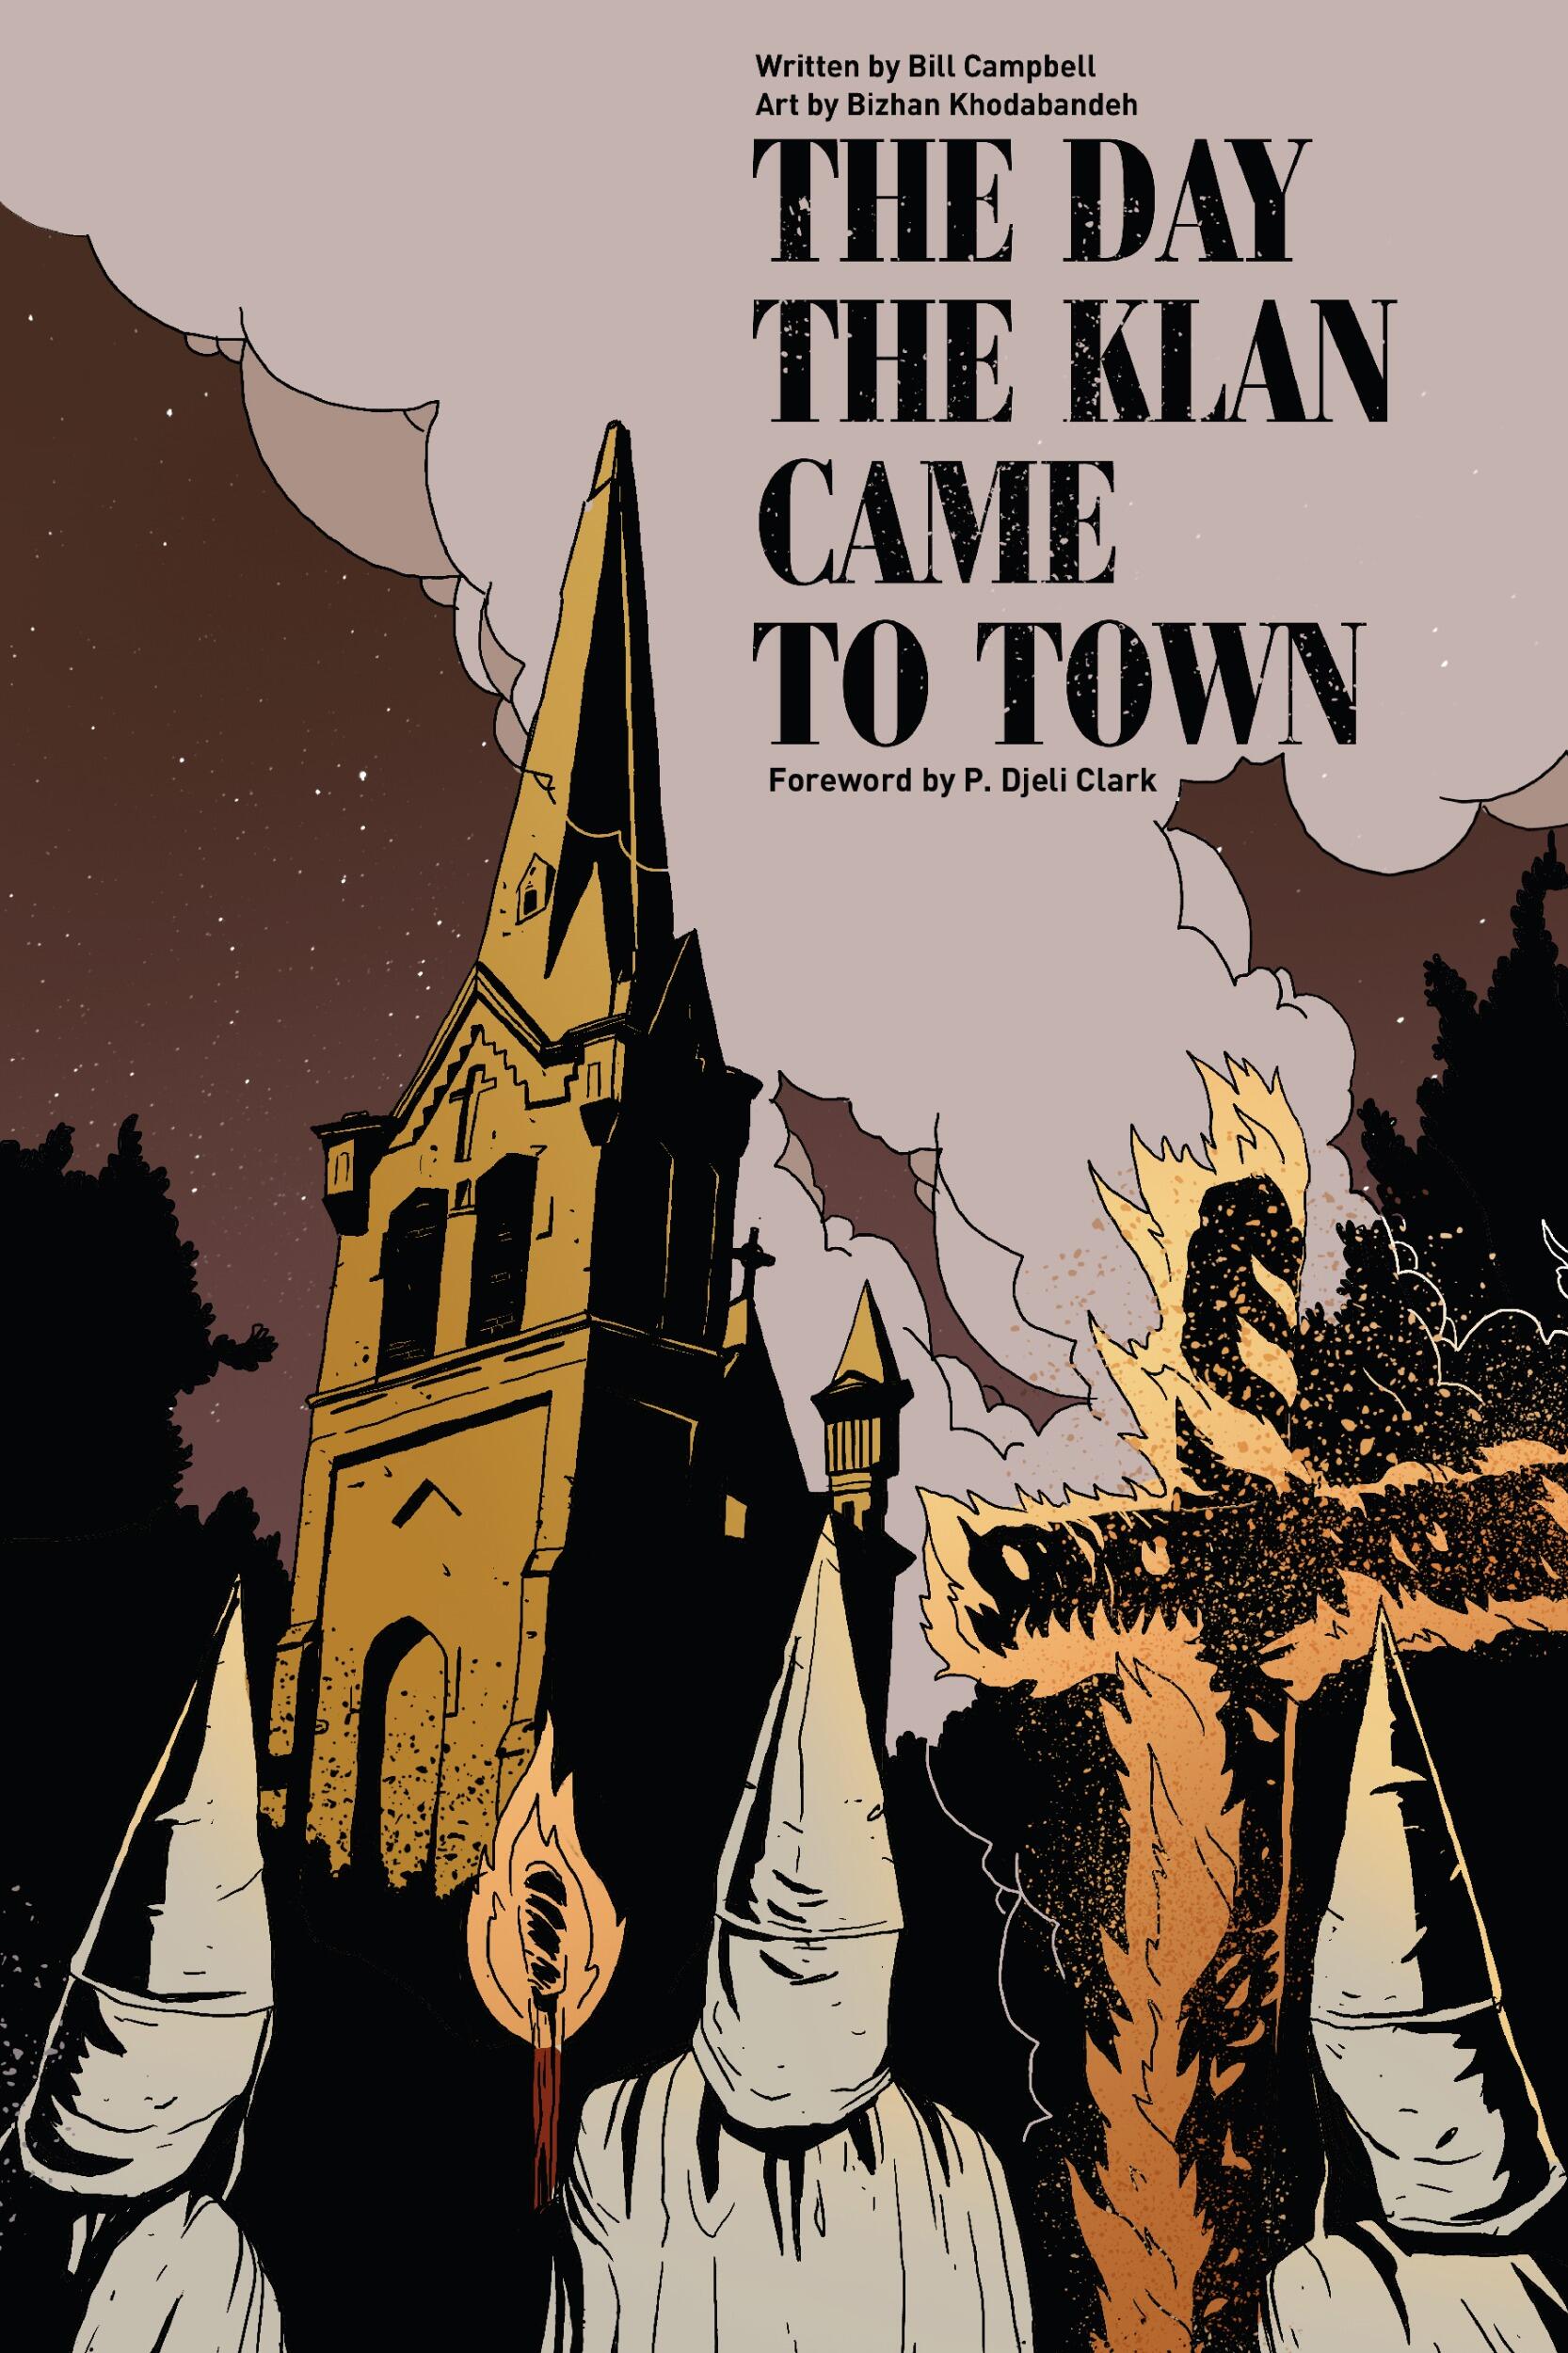 Cover of “The Day the Klan Came to Town,” a new graphic novel featuring art by VCU advertising professor Bizhan Khodabandeh